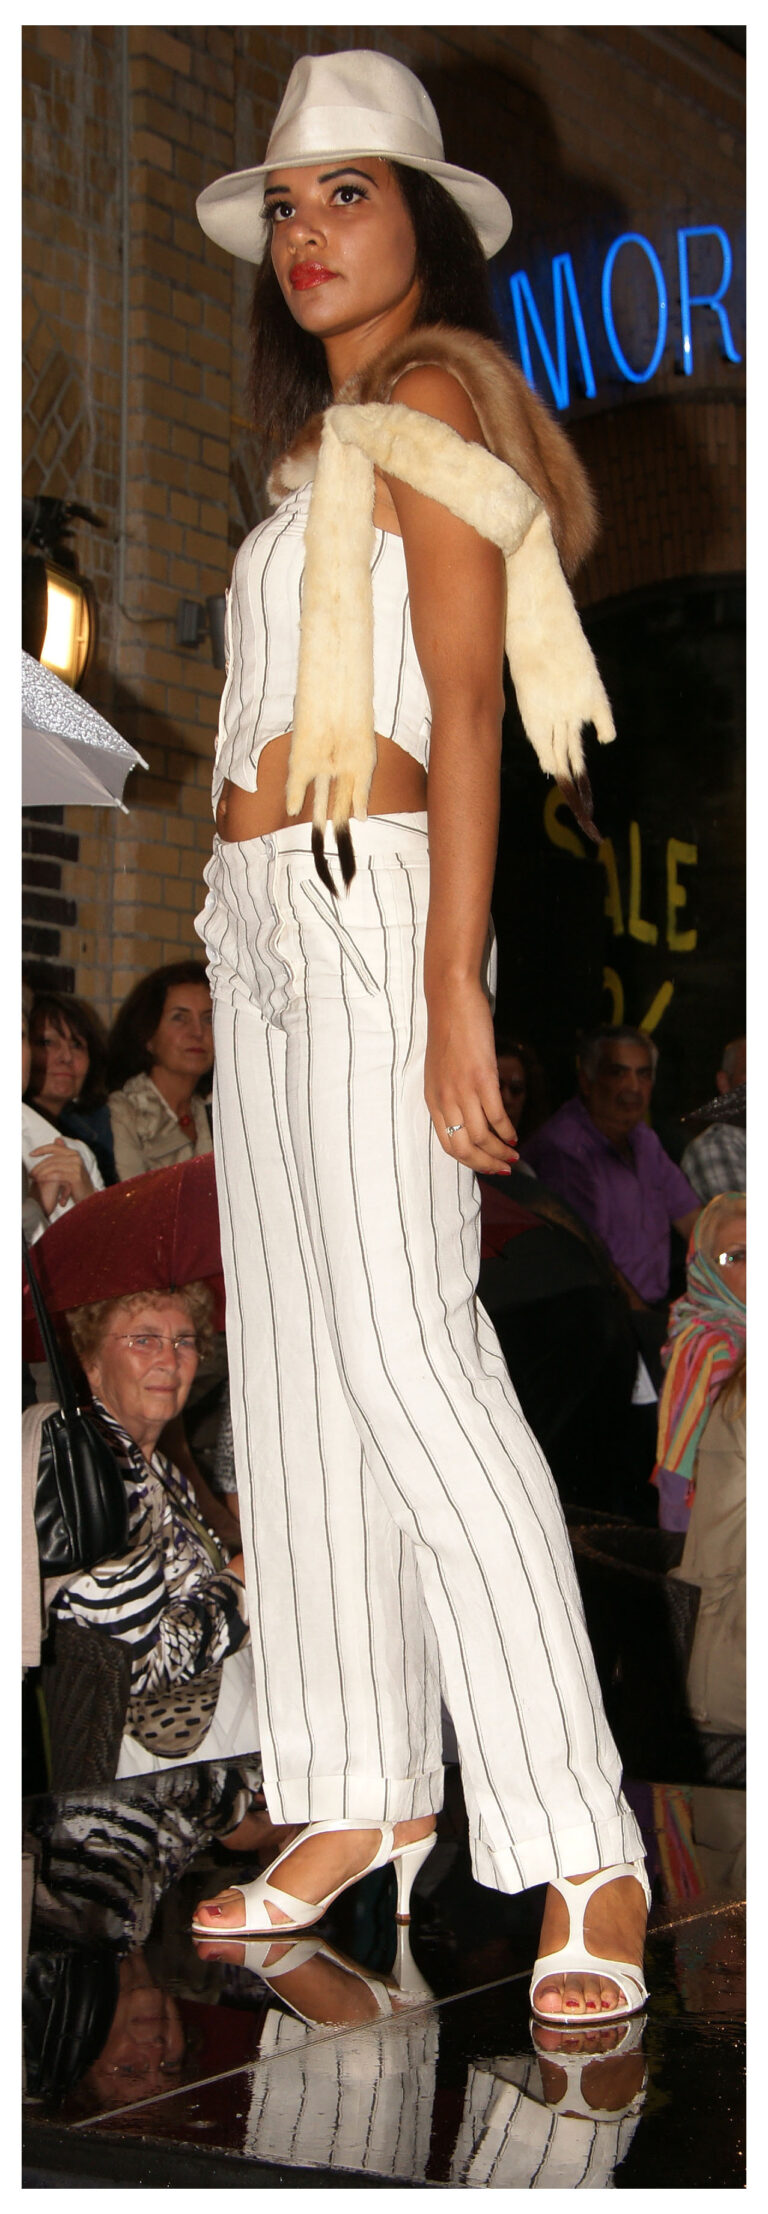 my collection "Syndikat" on the catwalk, summerpinstripestyle